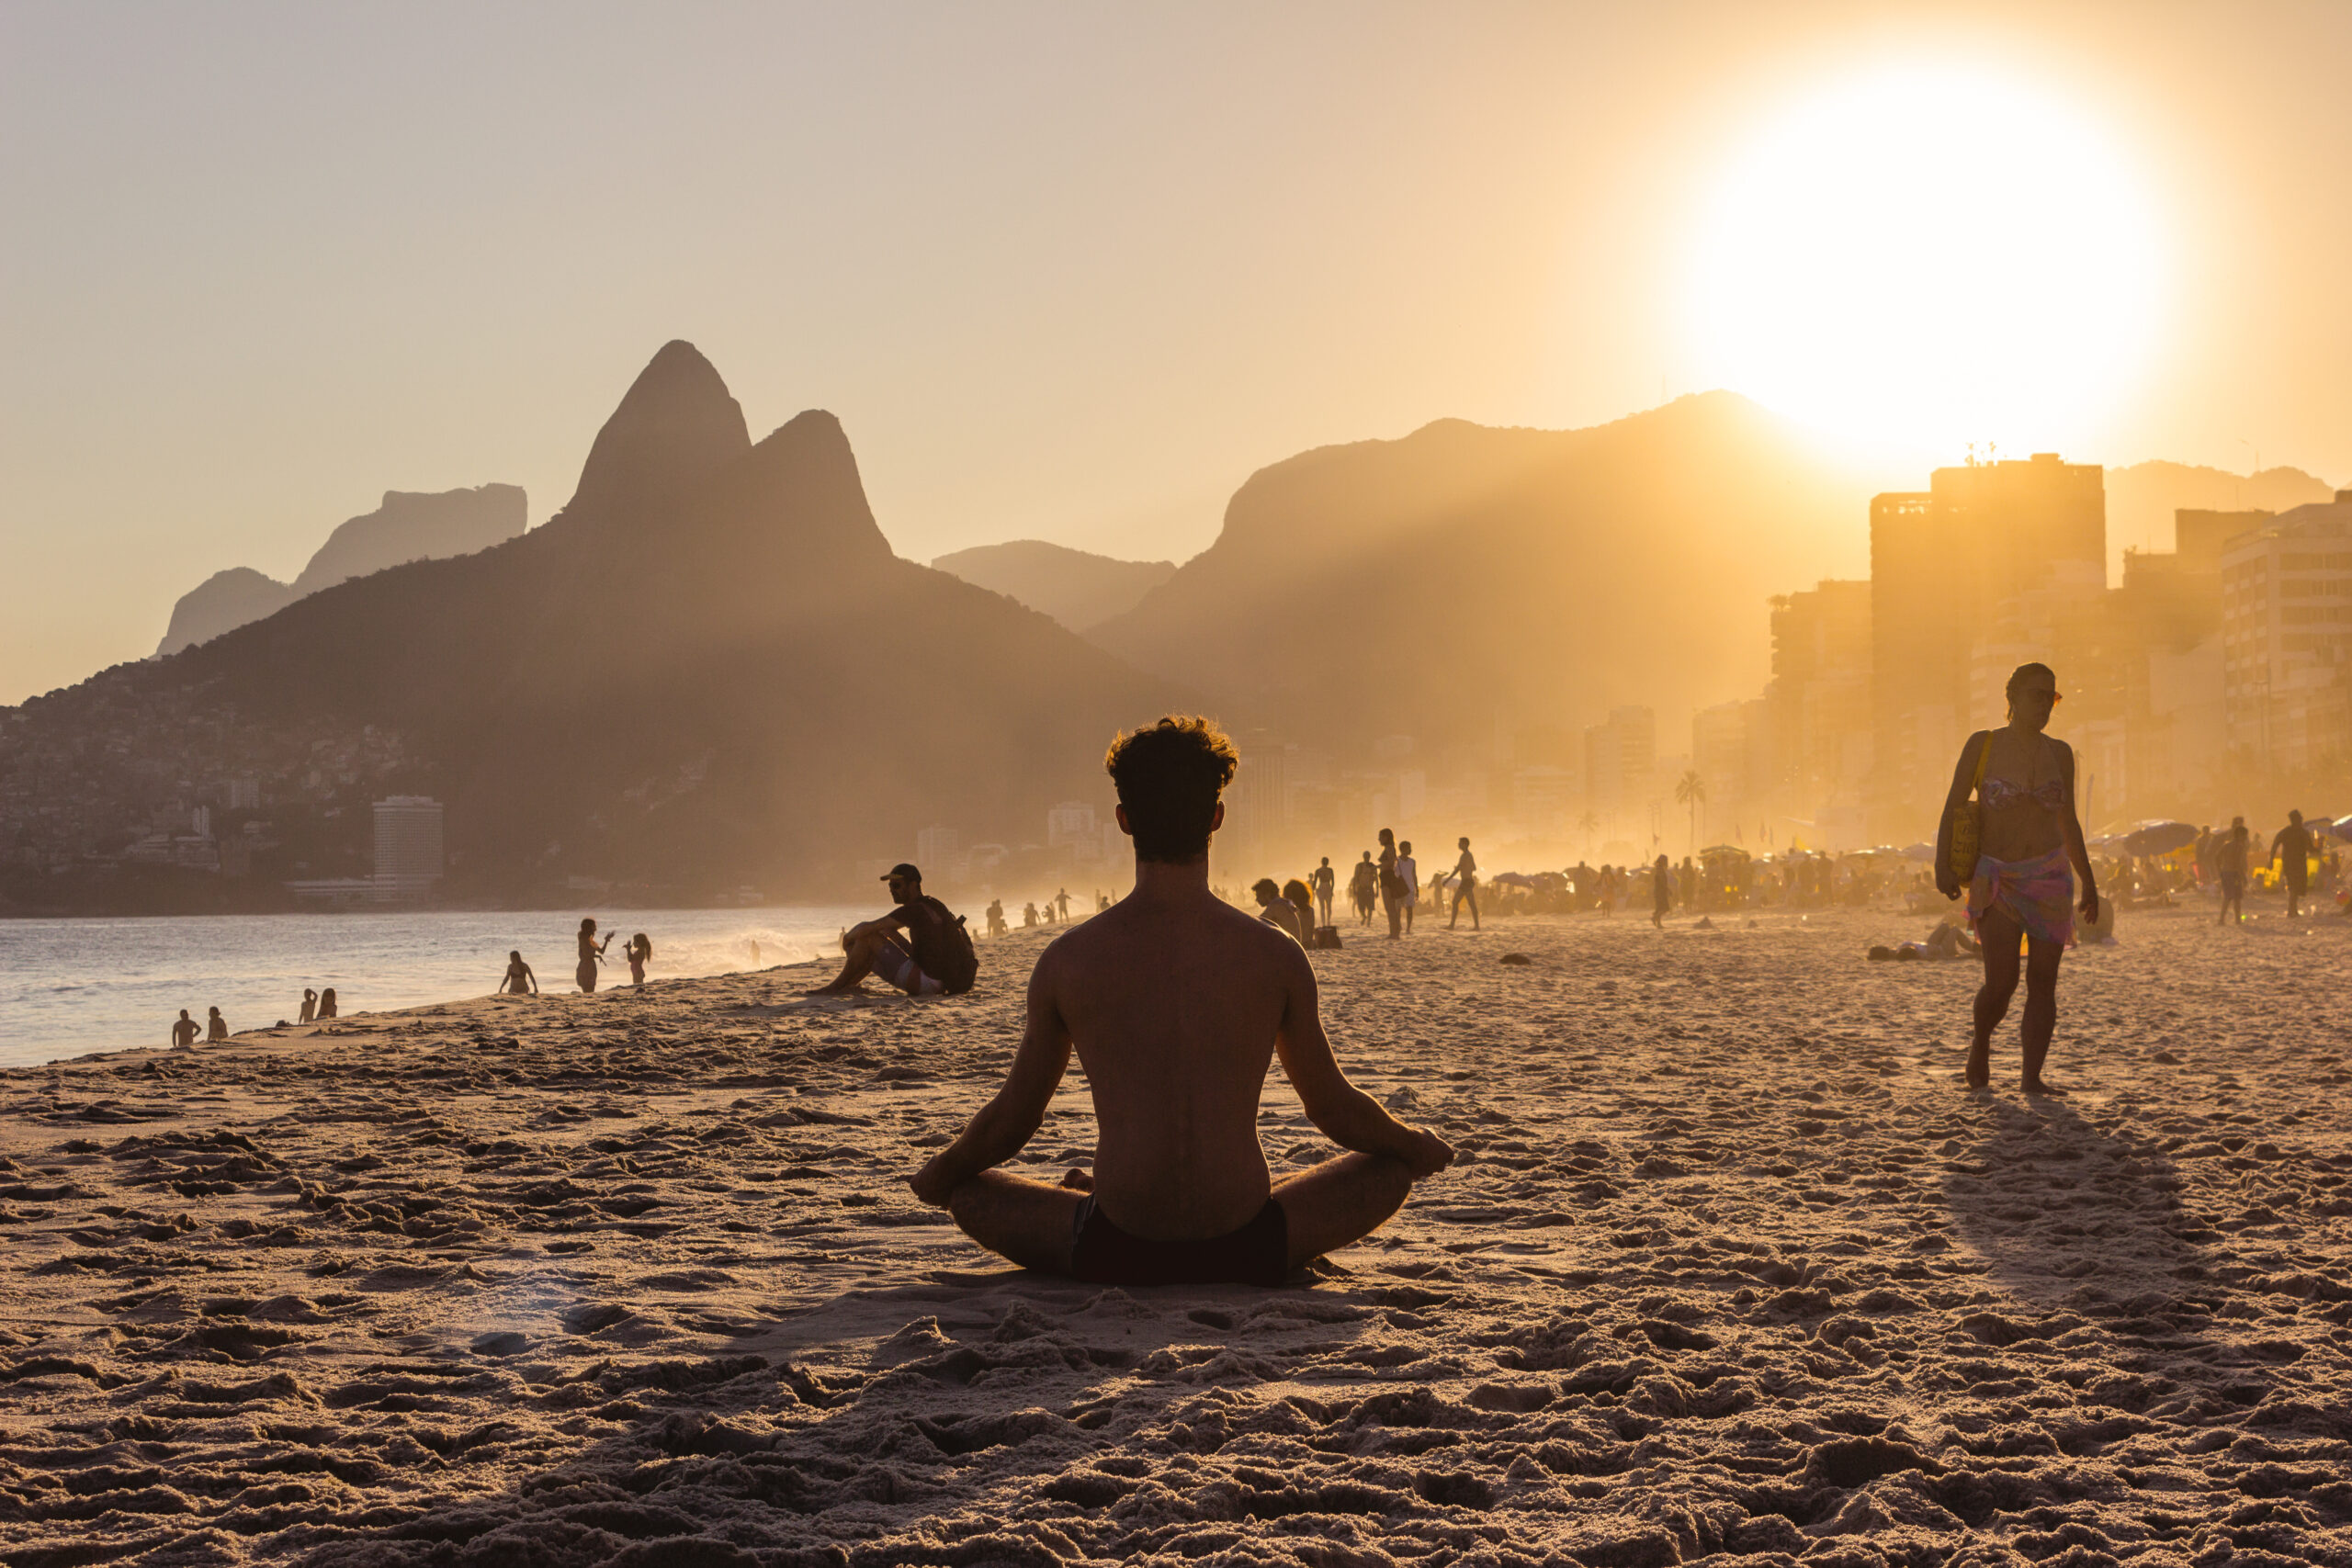 A Man sits cross-legged on a sandy Rio beach, meditating as the sun sets behind distant mountains. The silhouettes of other people walking and relaxing are visible, with the sky glowing in warm hues of orange and yellow.